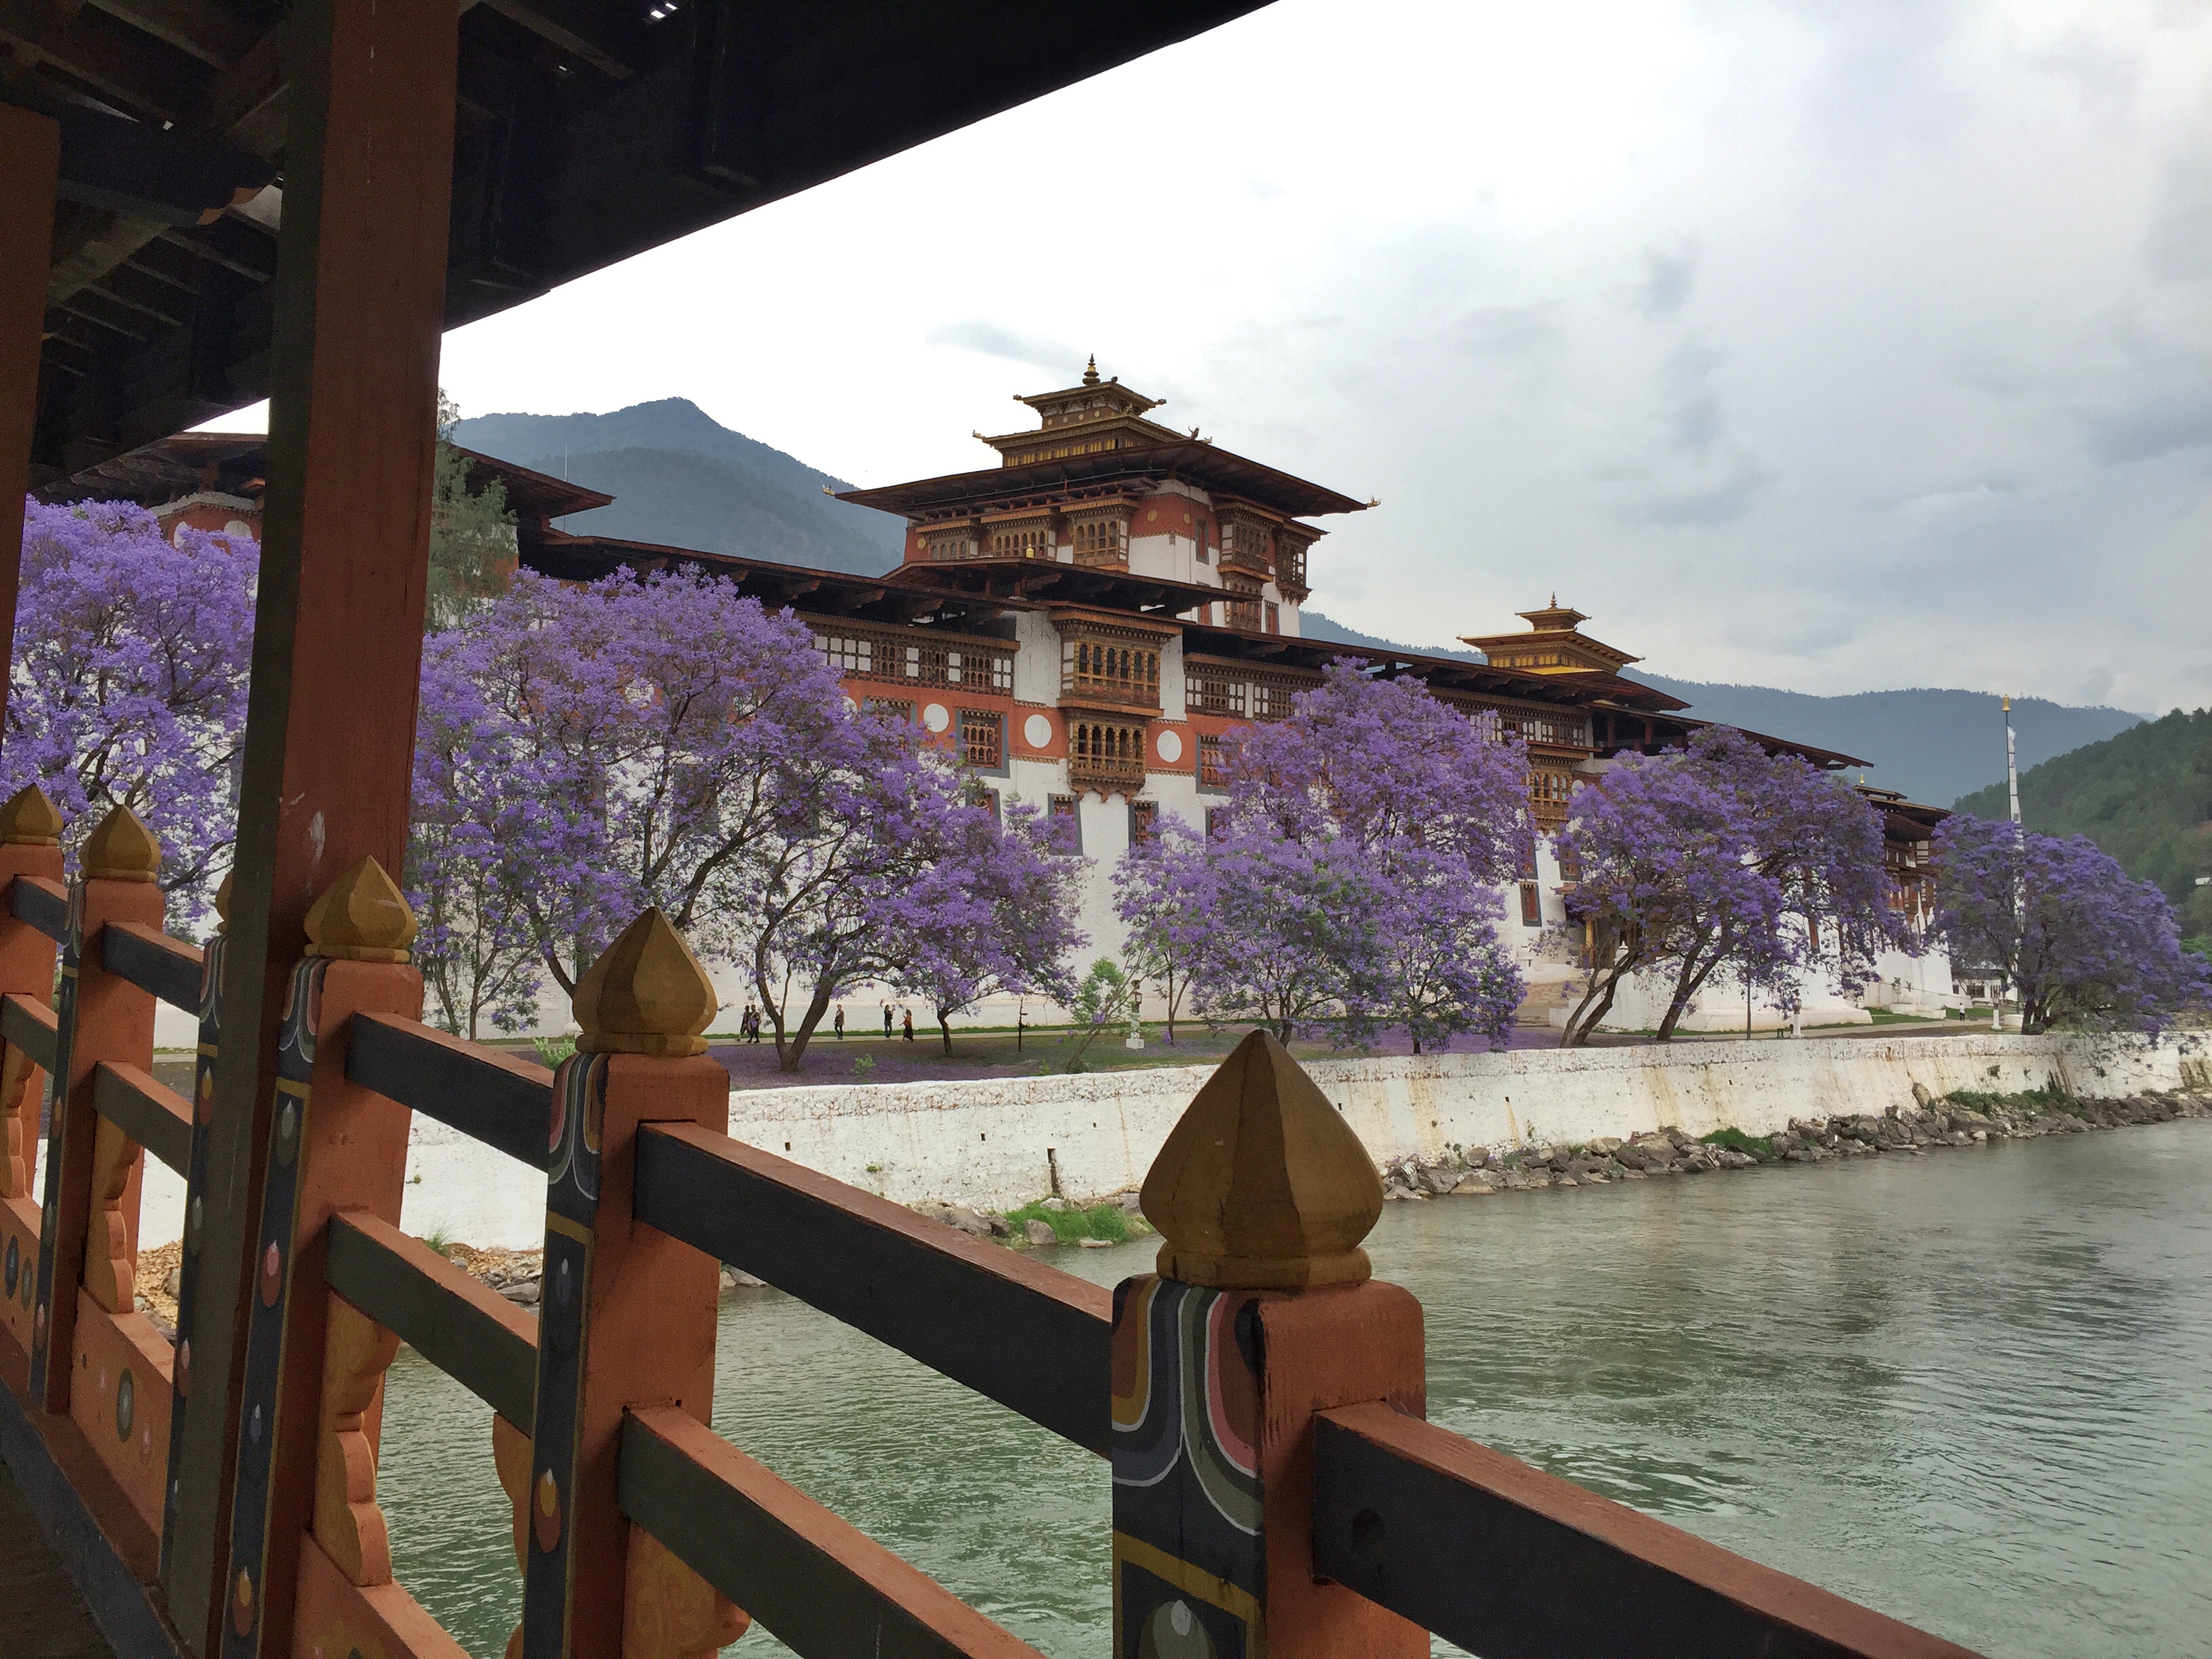 MY 10 REASONS TO VISIT BHUTAN- THE LAND OF THE THUNDER DRAGON